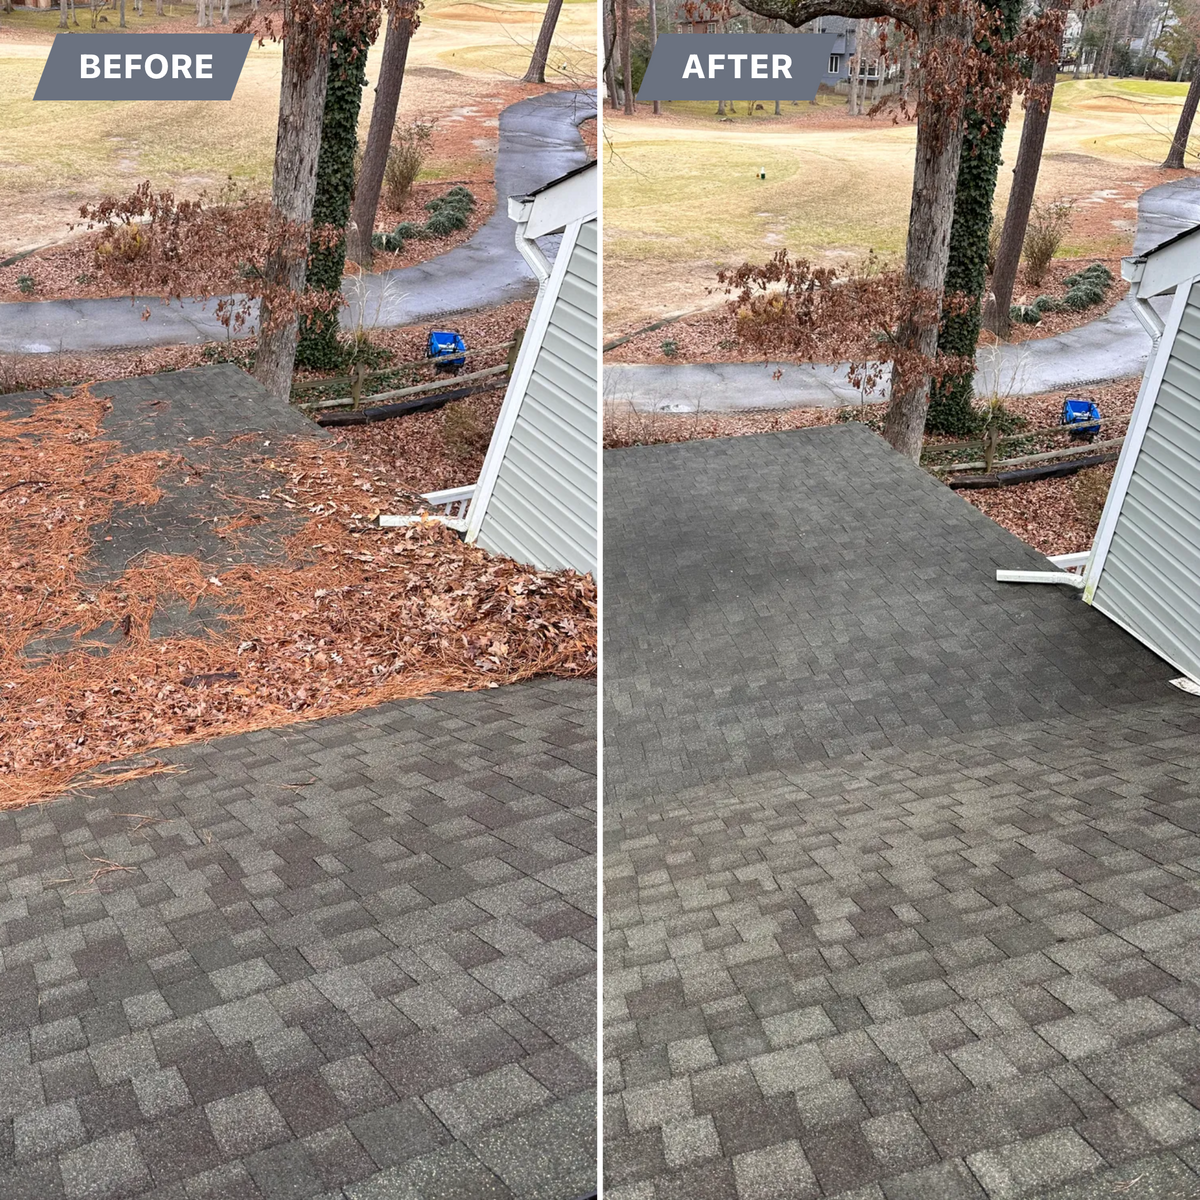 Gutter Cleaning for LeafTide Solutions in Richmond, VA